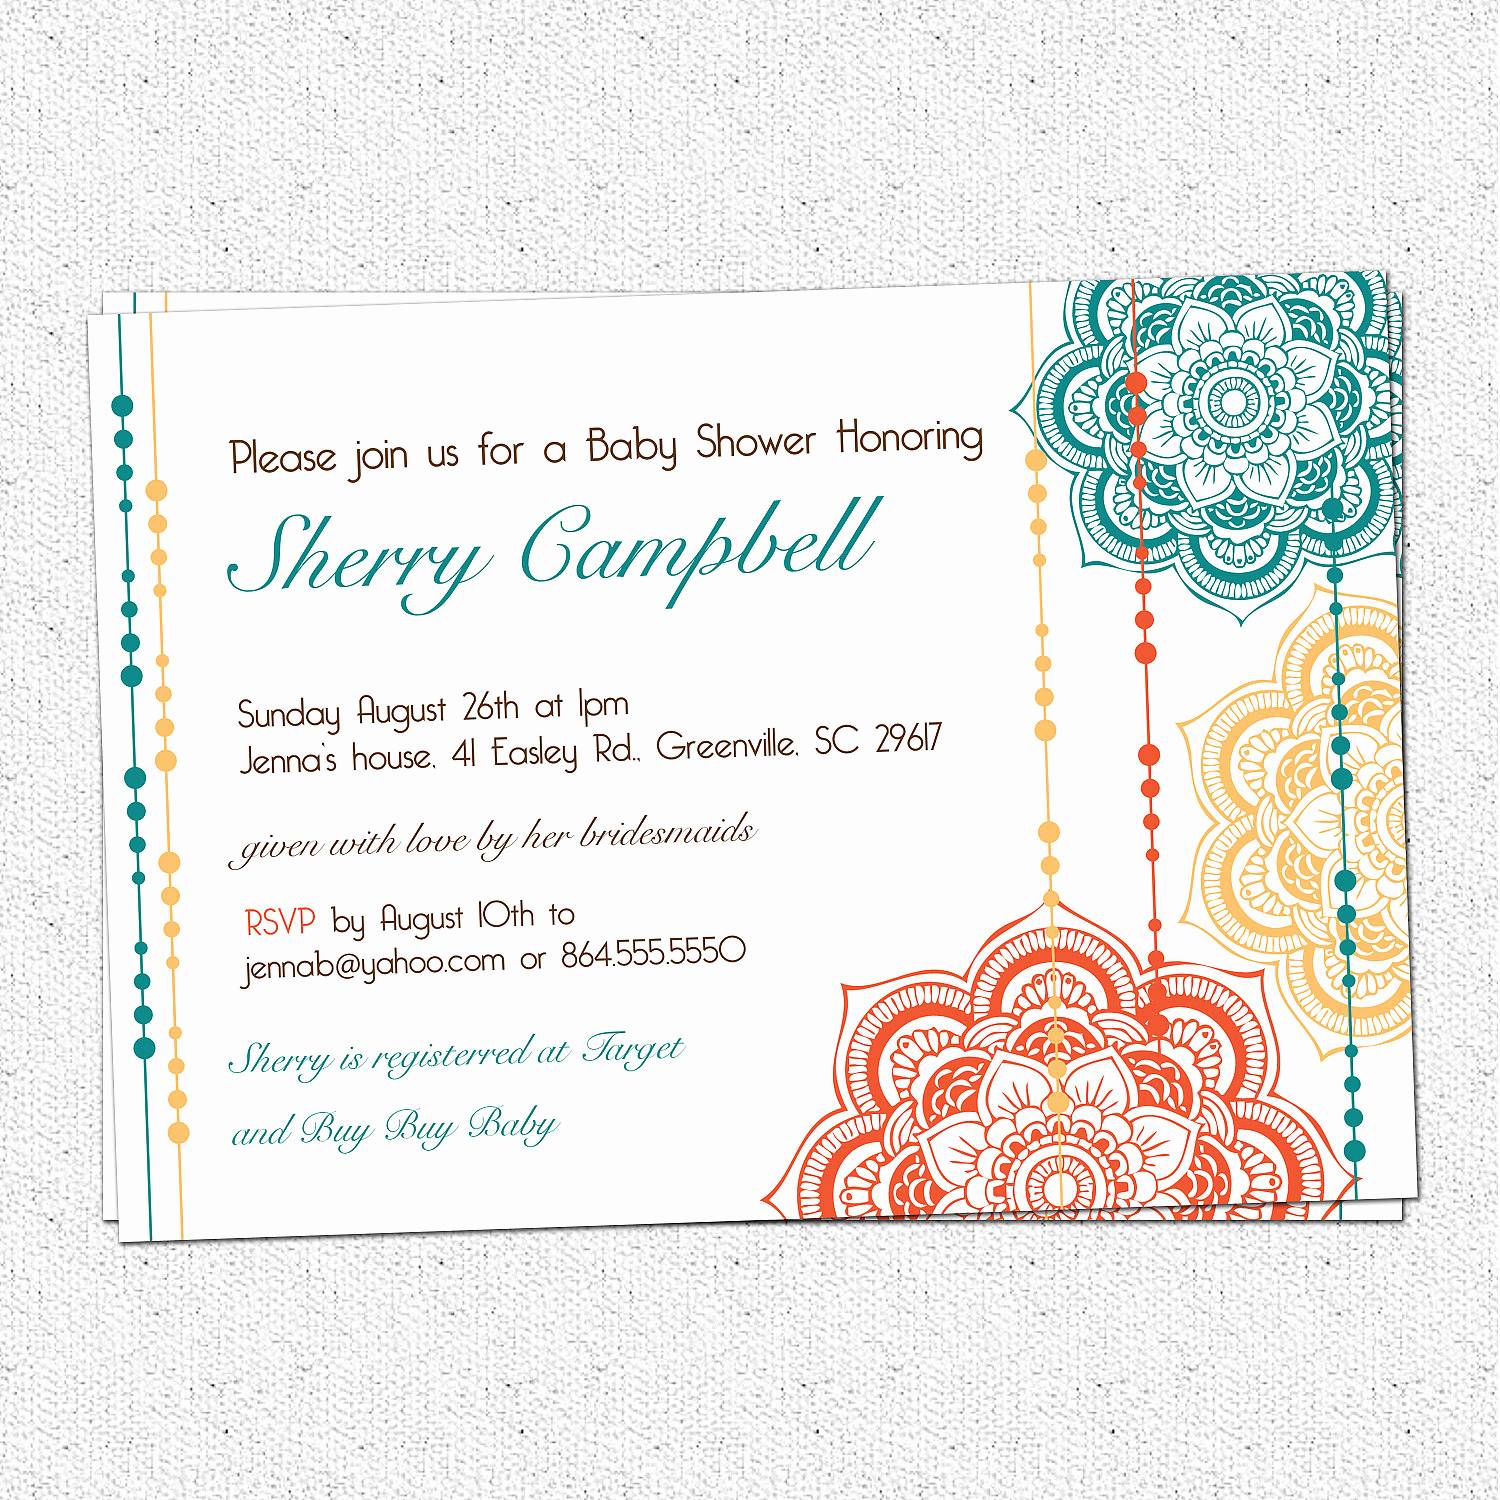 Full Size of Baby Shower:sturdy Baby Shower Invitation Template Image Concepts Baby Shower Invitation Template Free Princess Baby Shower Invitation Templates Best Of Baby Shower Free Princess Baby Shower Invitation Templates Best Of Baby Shower Elegant Baby Shower Invitations Elegant Baby Shower